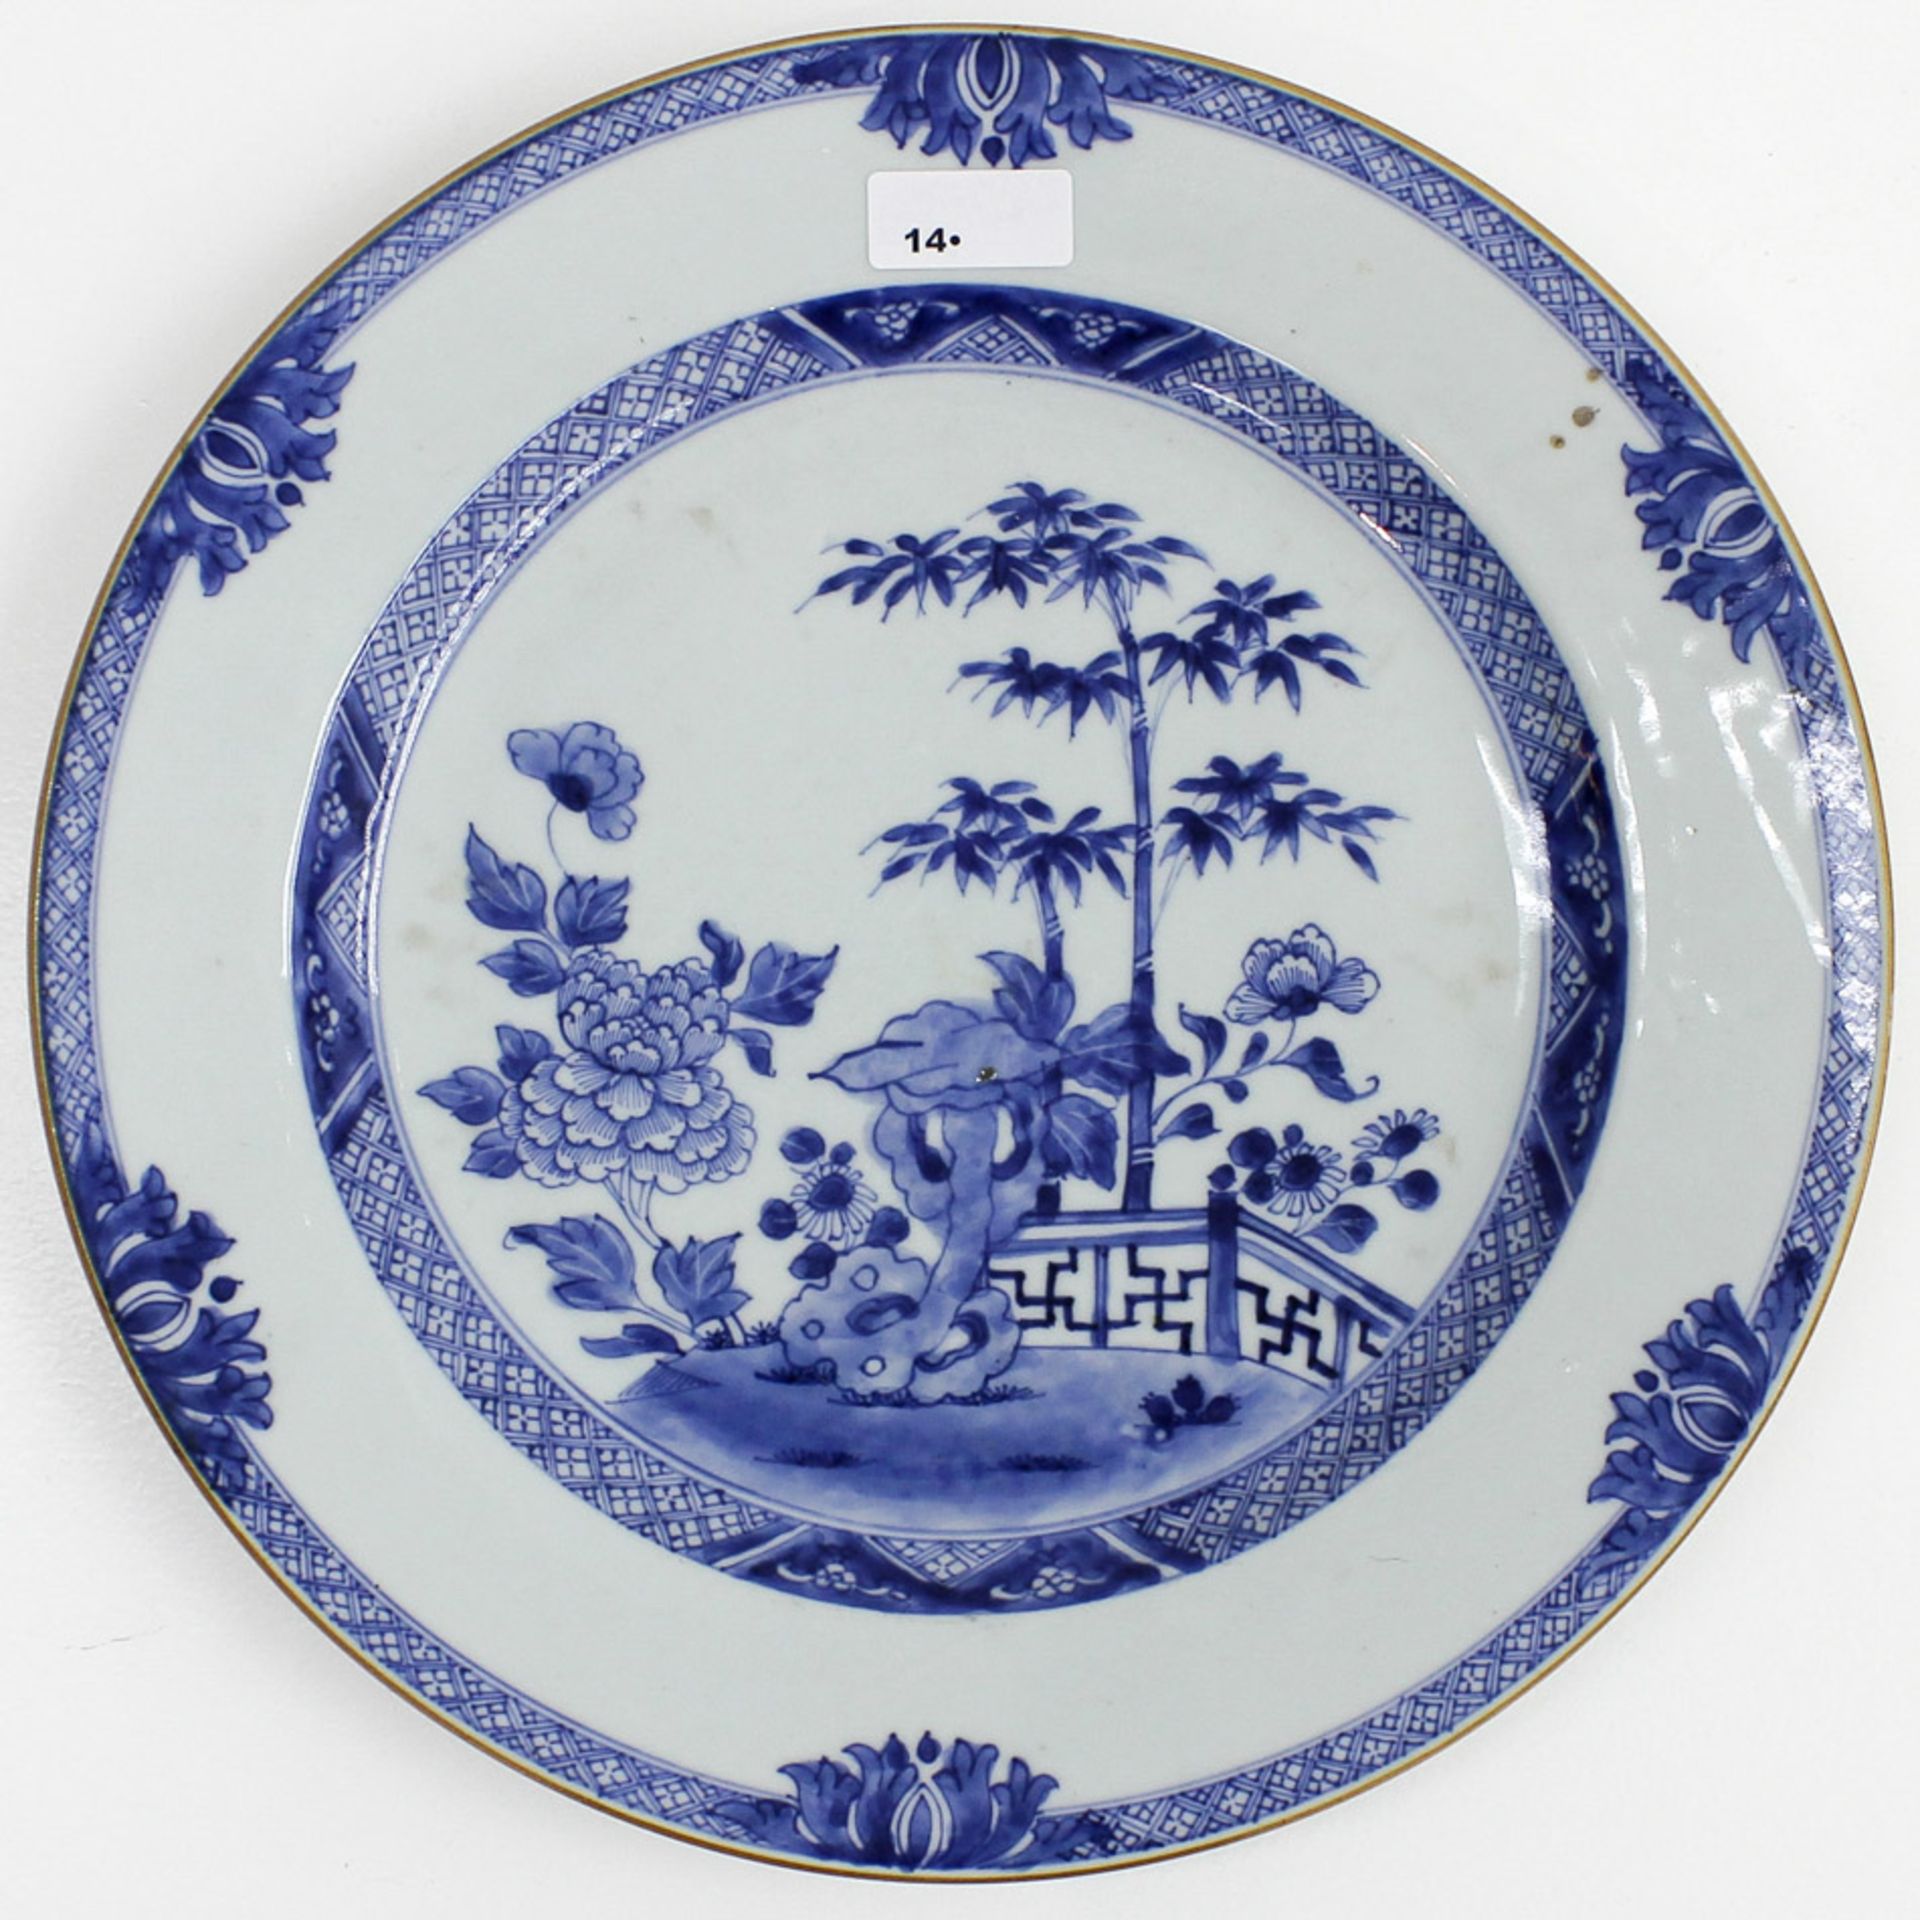 18th Century China Porcelain Plate Blue and white garden decor with florals, small hairline to